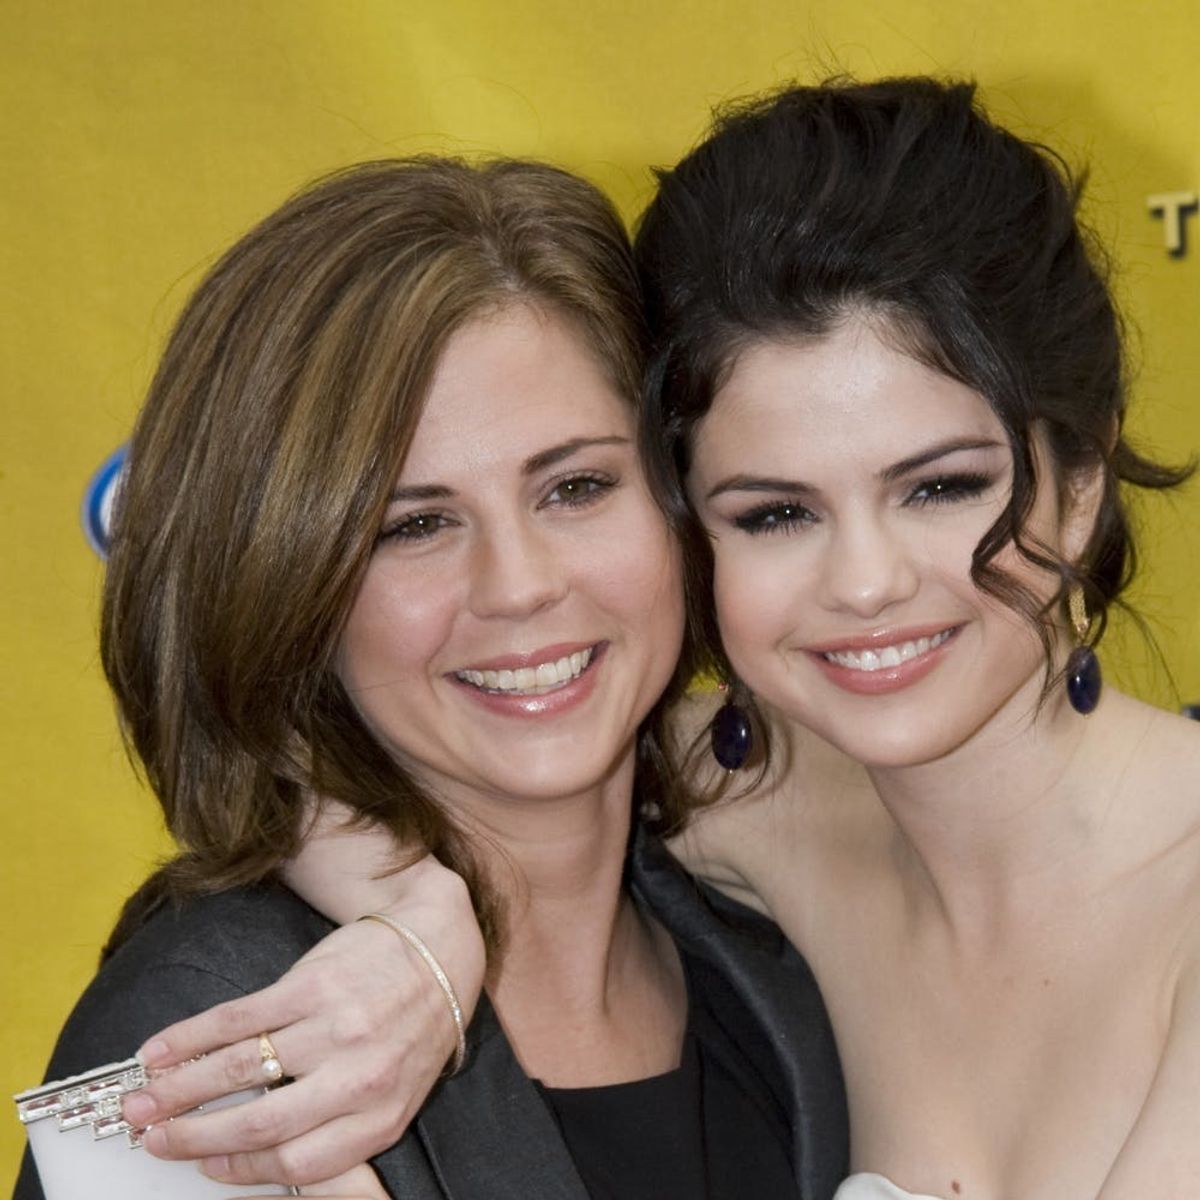 Selena Gomez’s Mom is Taking Some Serious Heat for Comments About Shawn Mendes and Charlie Puth